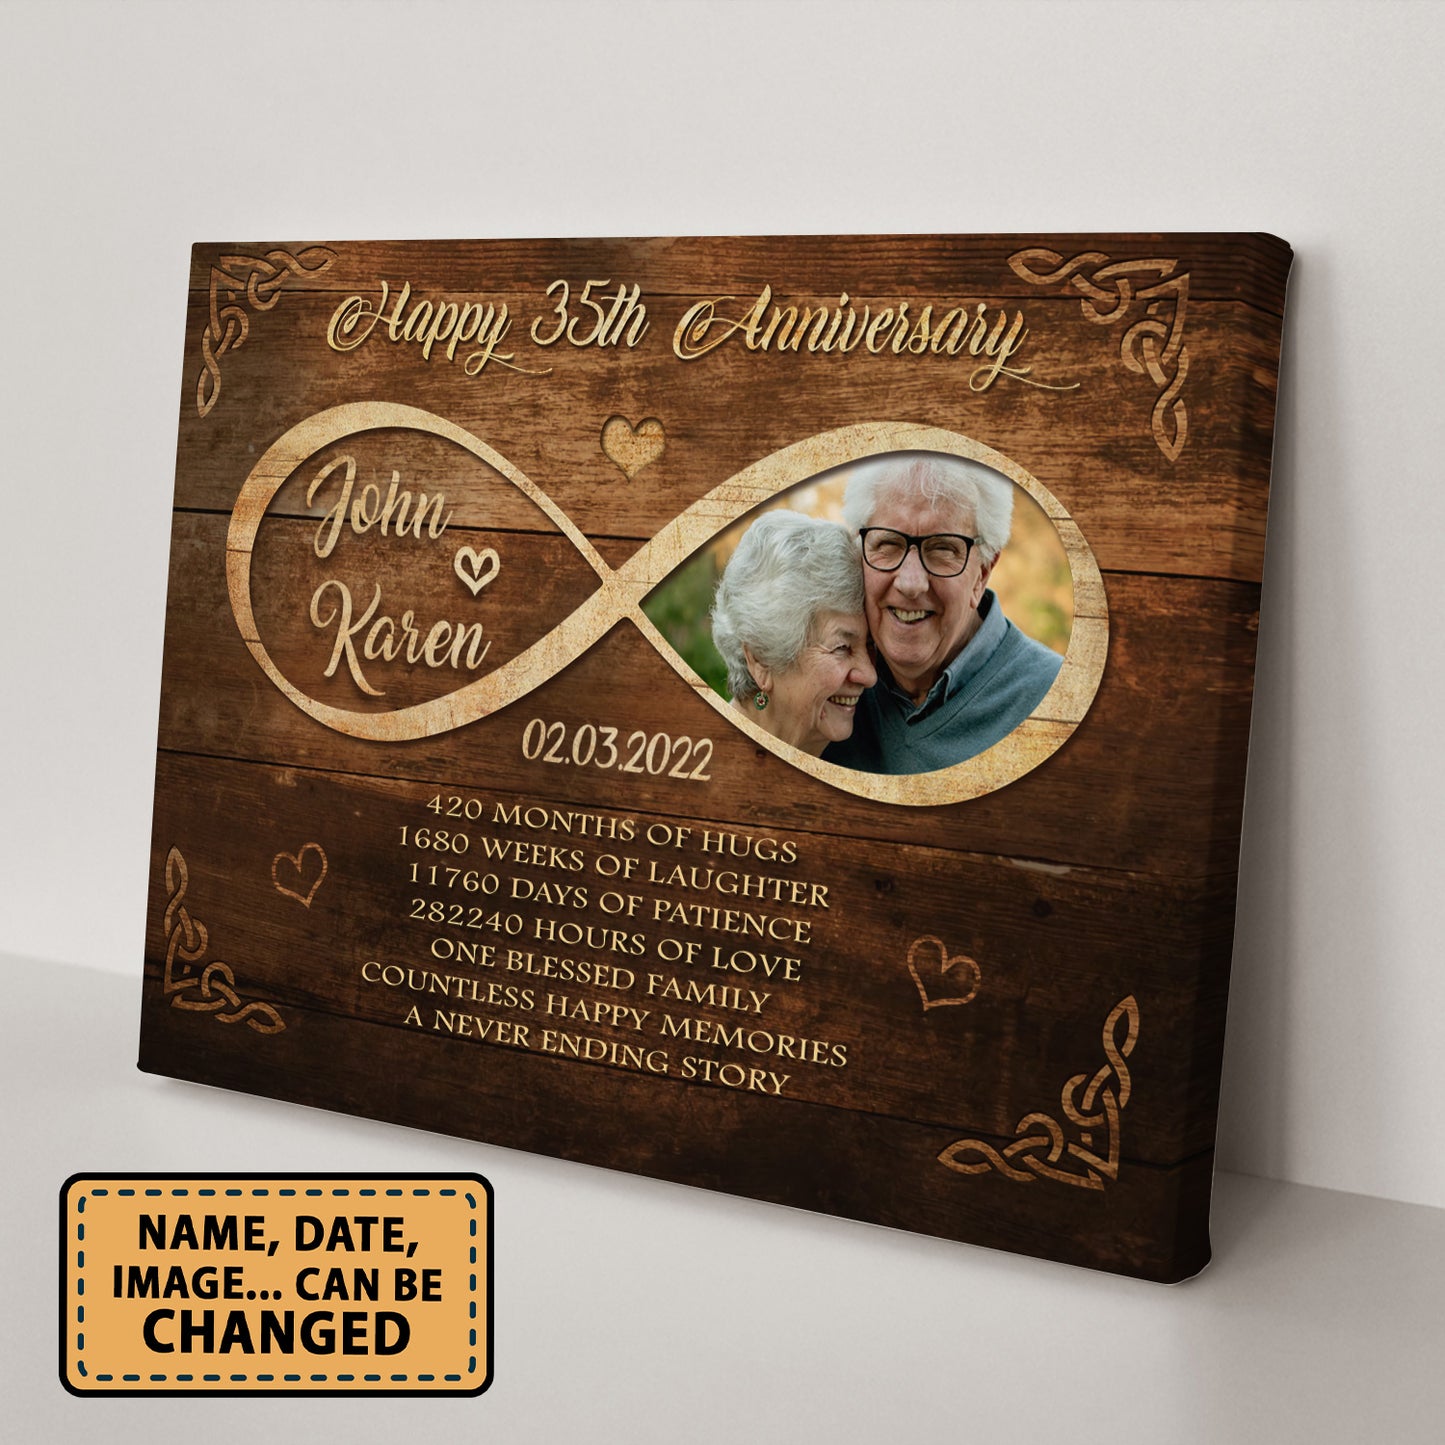 Happy 35th Anniversary Old Television Anniversary Canvas Valentine Gifts